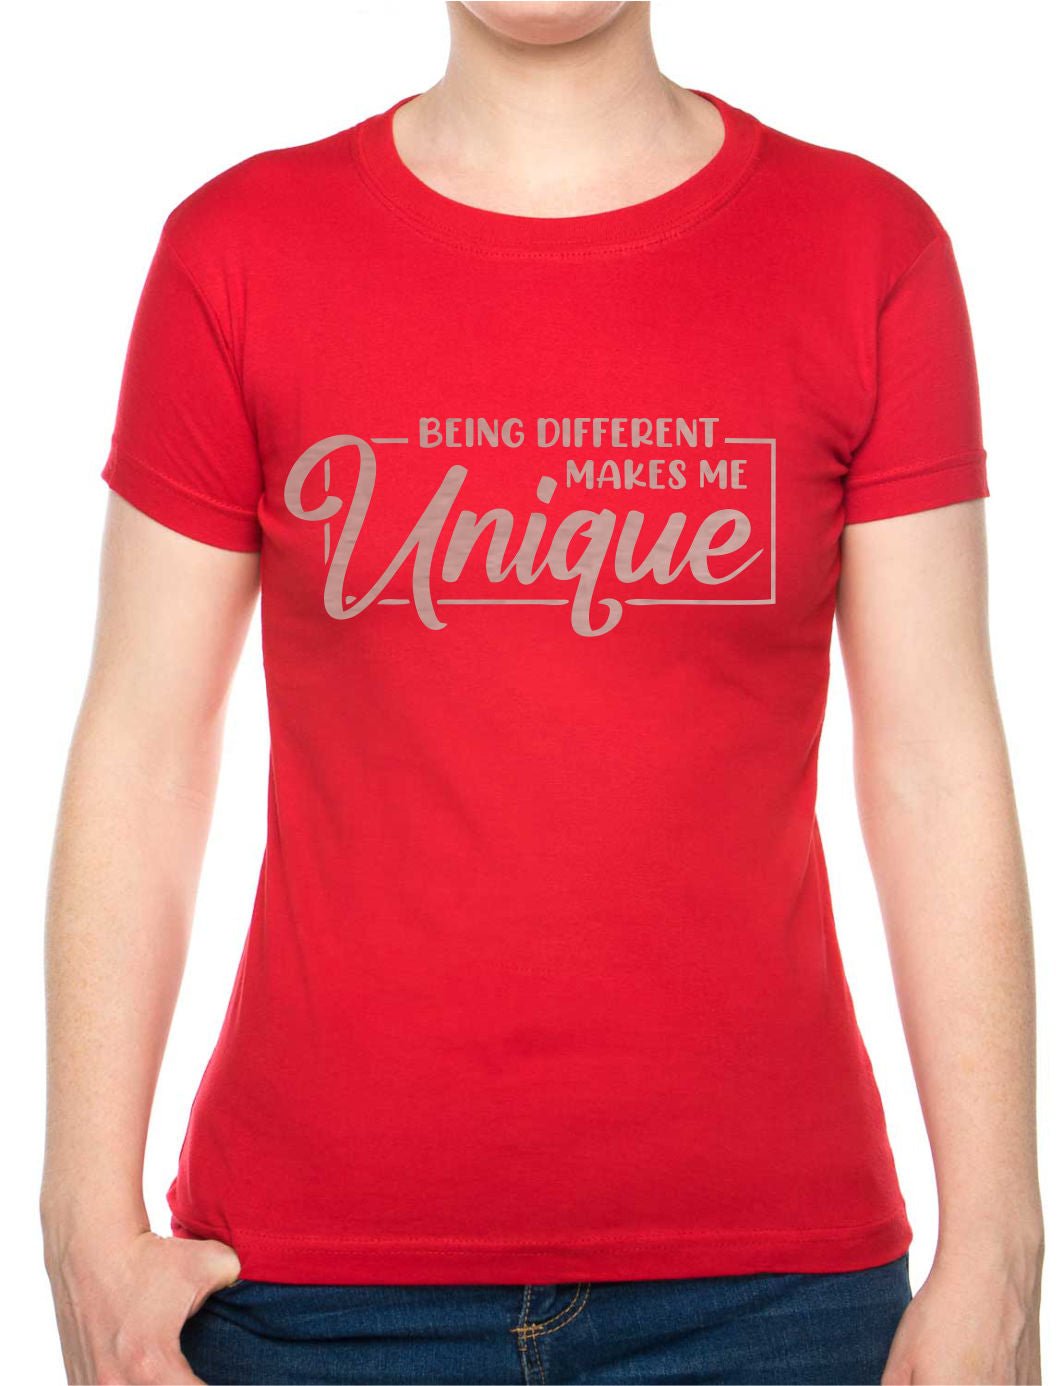 Being Different Makes Me Unique Metal Awareness Self Love Womens T-Shirt Tee